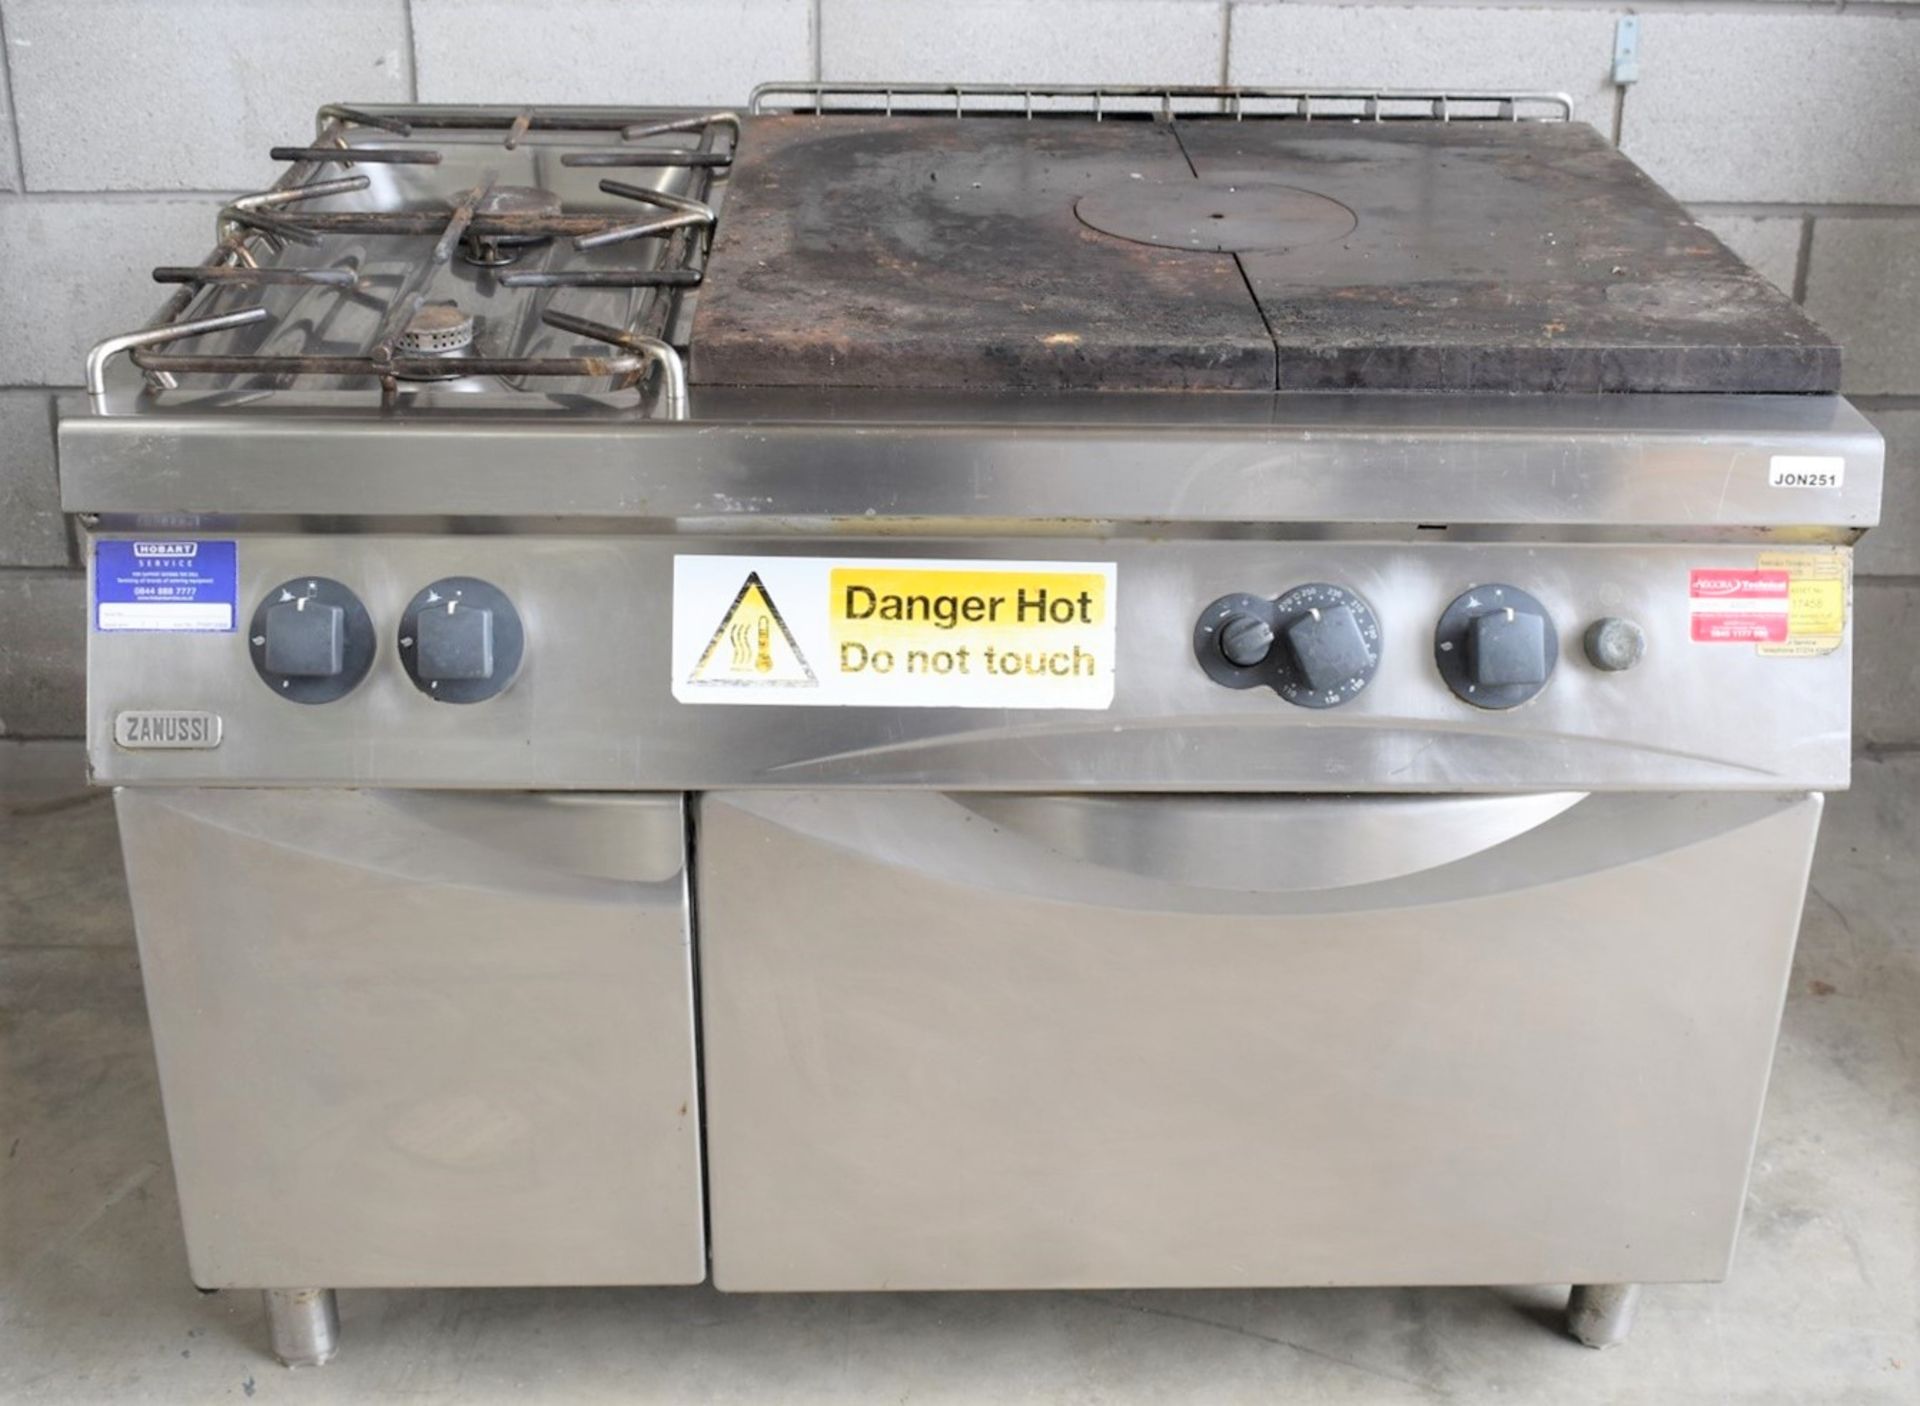 1 x Zanussi Gas Range Cooker With Two Burners and Contact Hot Plate - Stainless Steel Exterior - Image 2 of 10